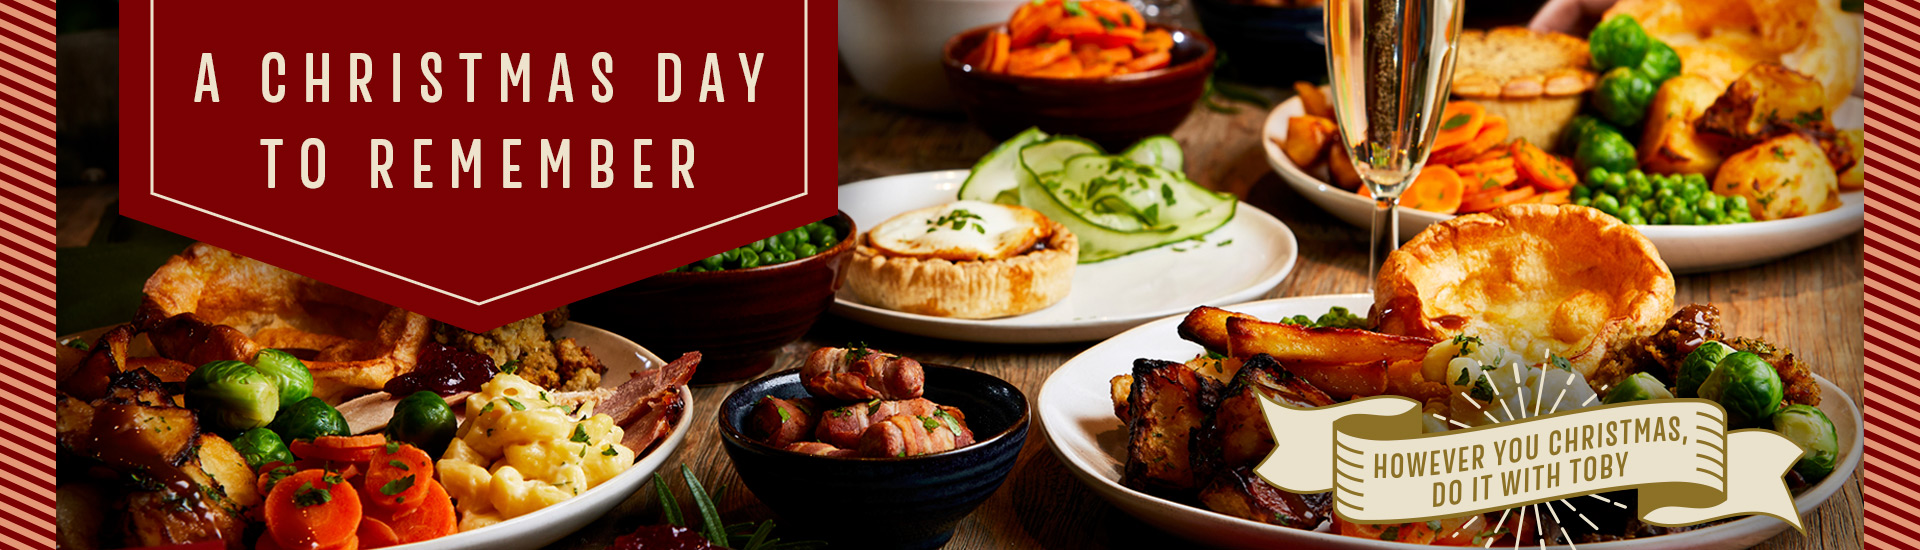 Christmas Day menu at Toby Carvery Norton Canes